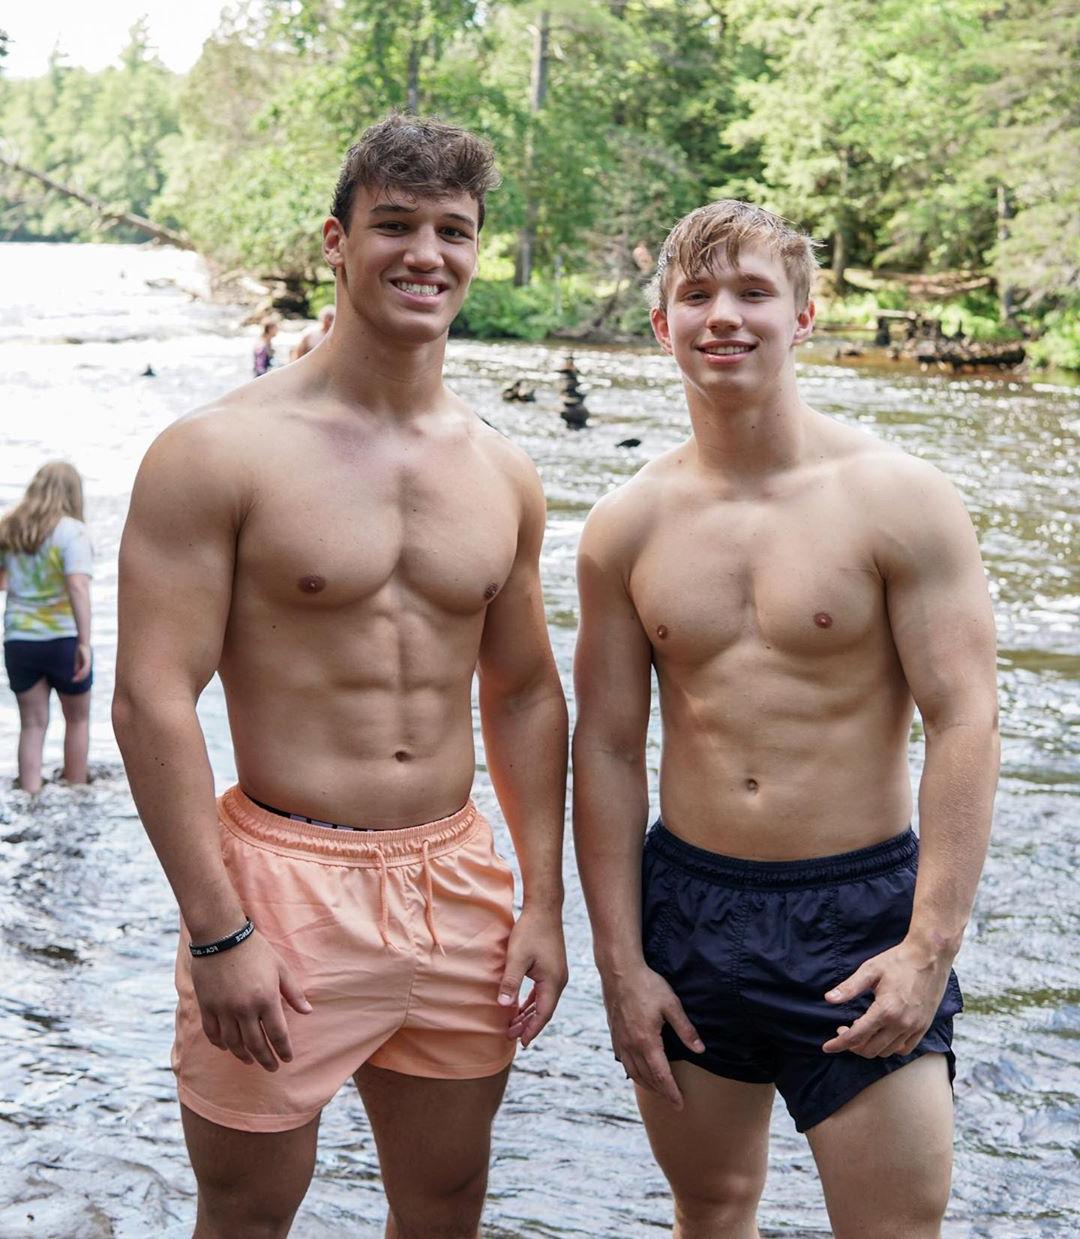 two-shirtless-bros-smiling-best-buddies-river-adventure-beefy-young-muscular-teen-male-bodies